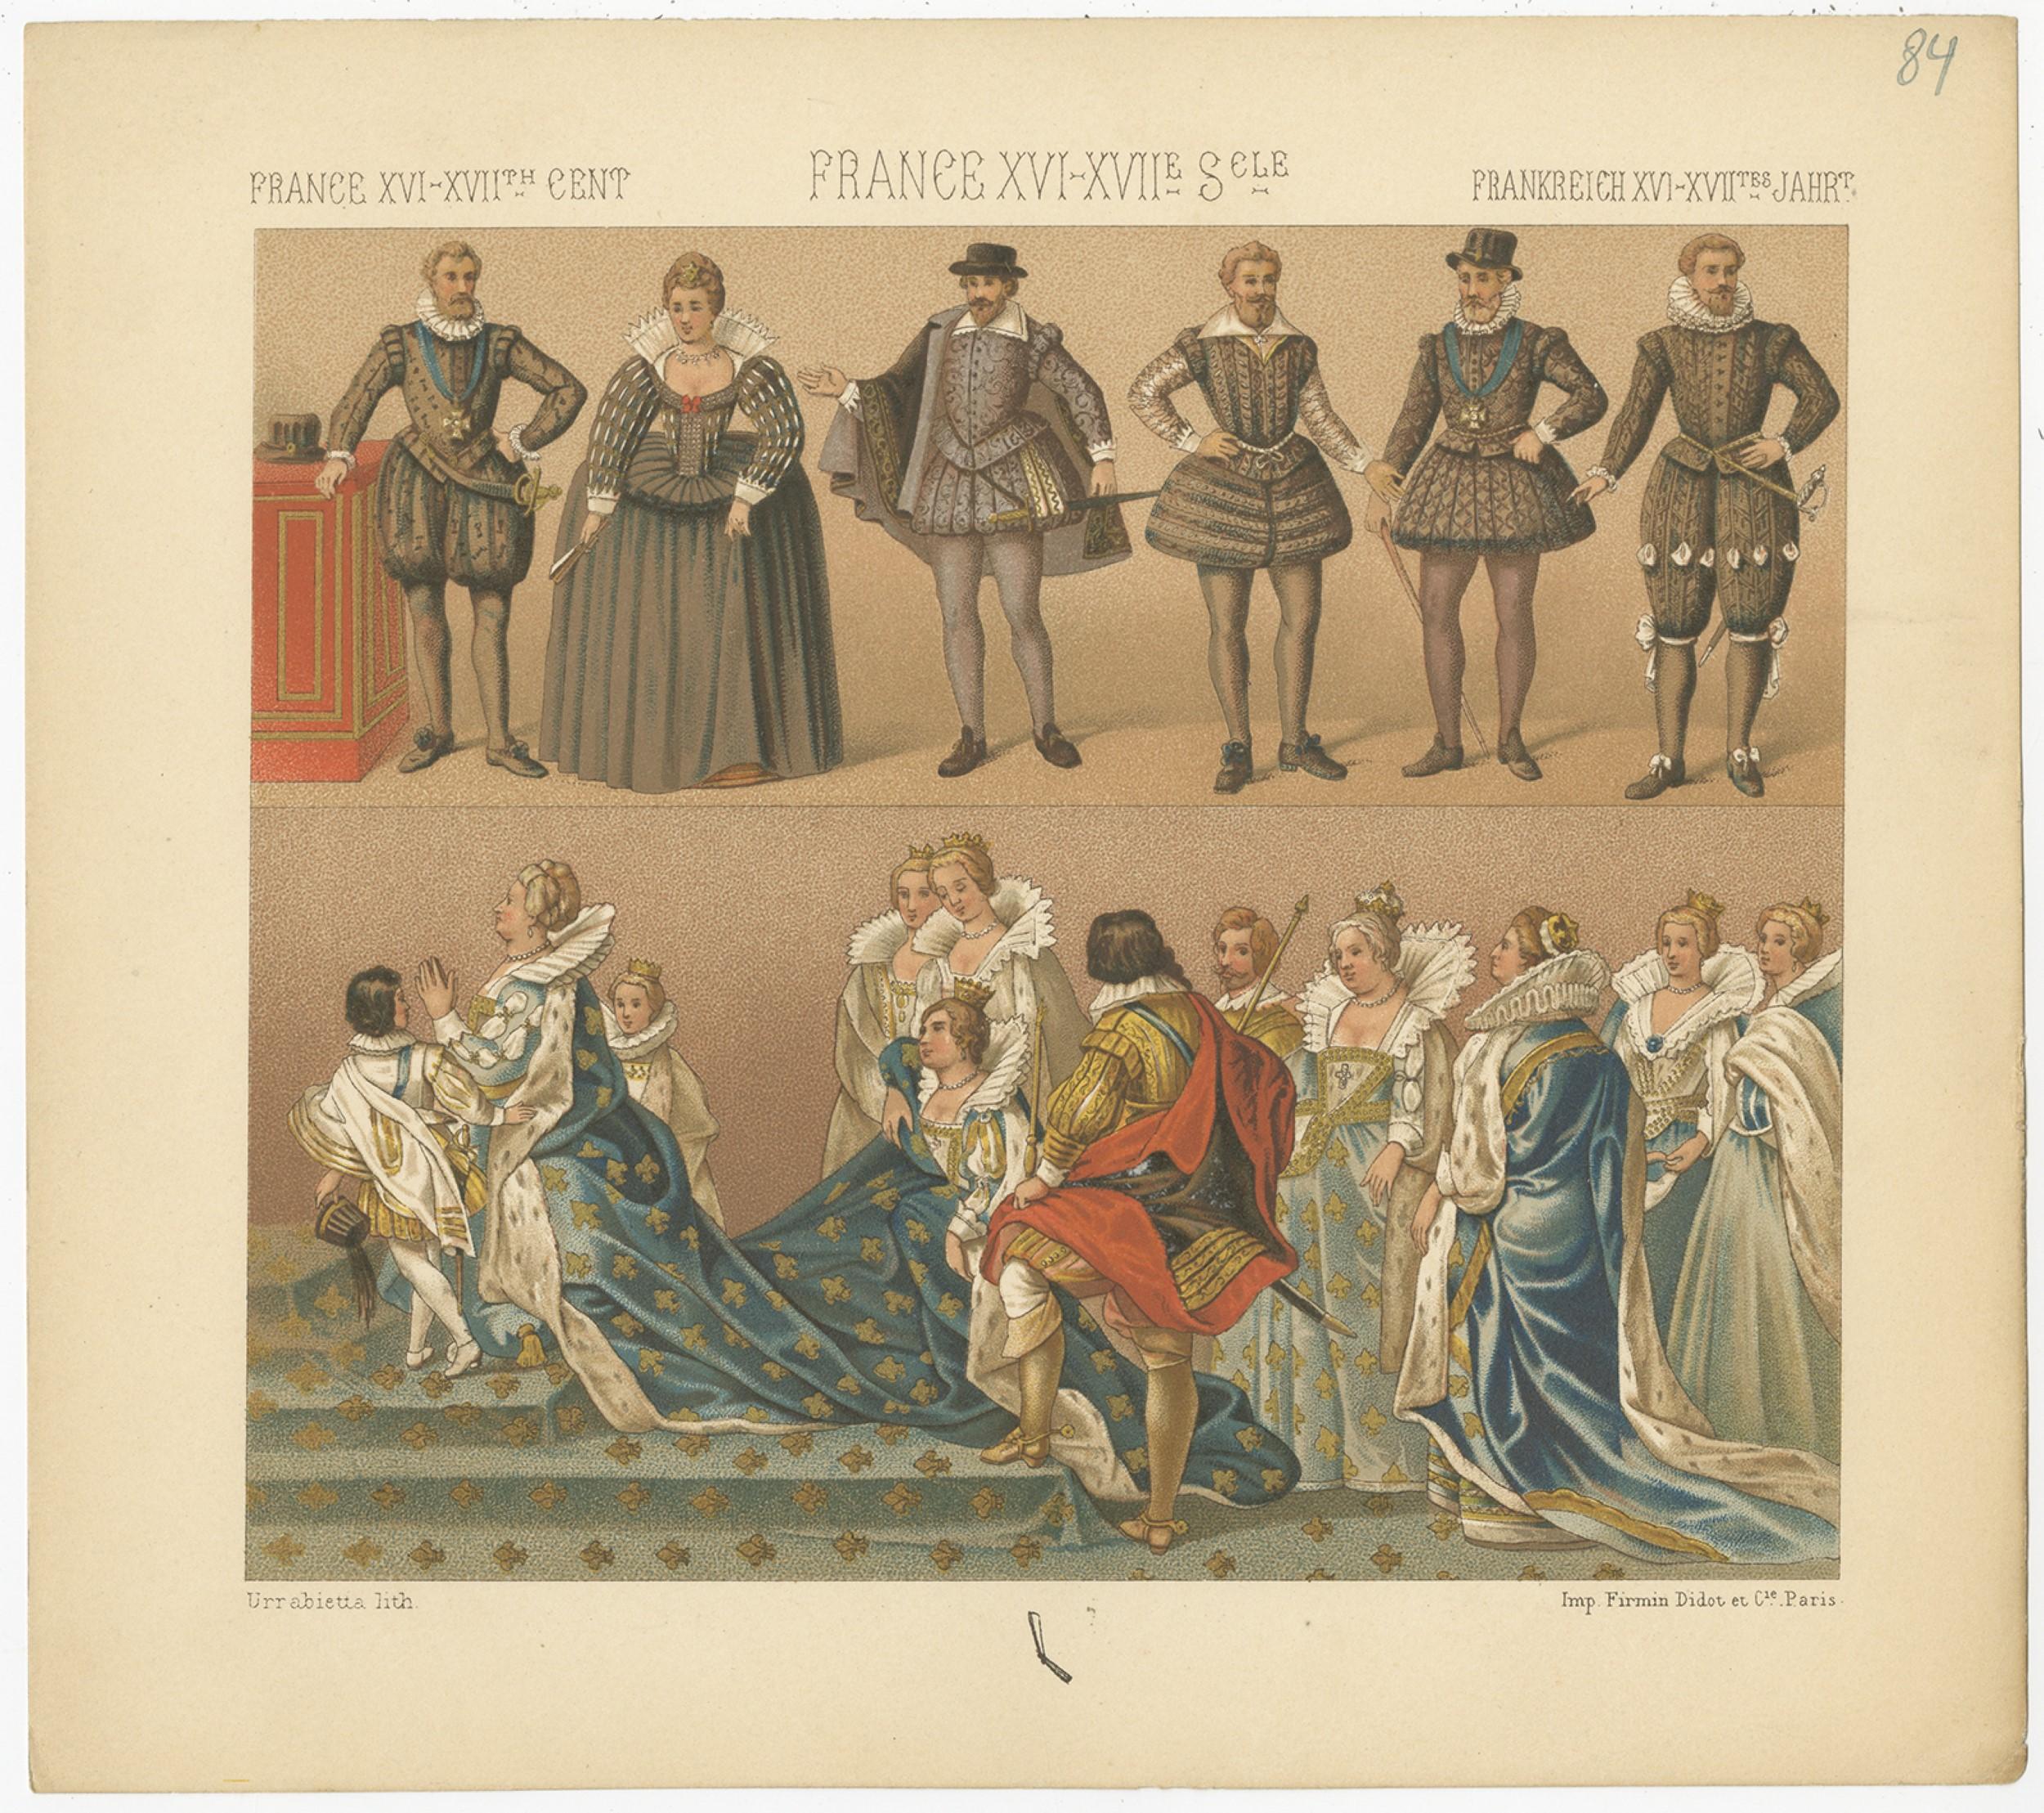 Antique print titled 'France XVI, XVIIth Cent - France XVIe, XVIIe Siecle - Frankreich XVI, XVItes Jahr'. Chromolithograph of French XVI-XVIIth Century Costumes. This print originates from 'Le Costume Historique' by M.A. Racinet. Published circa